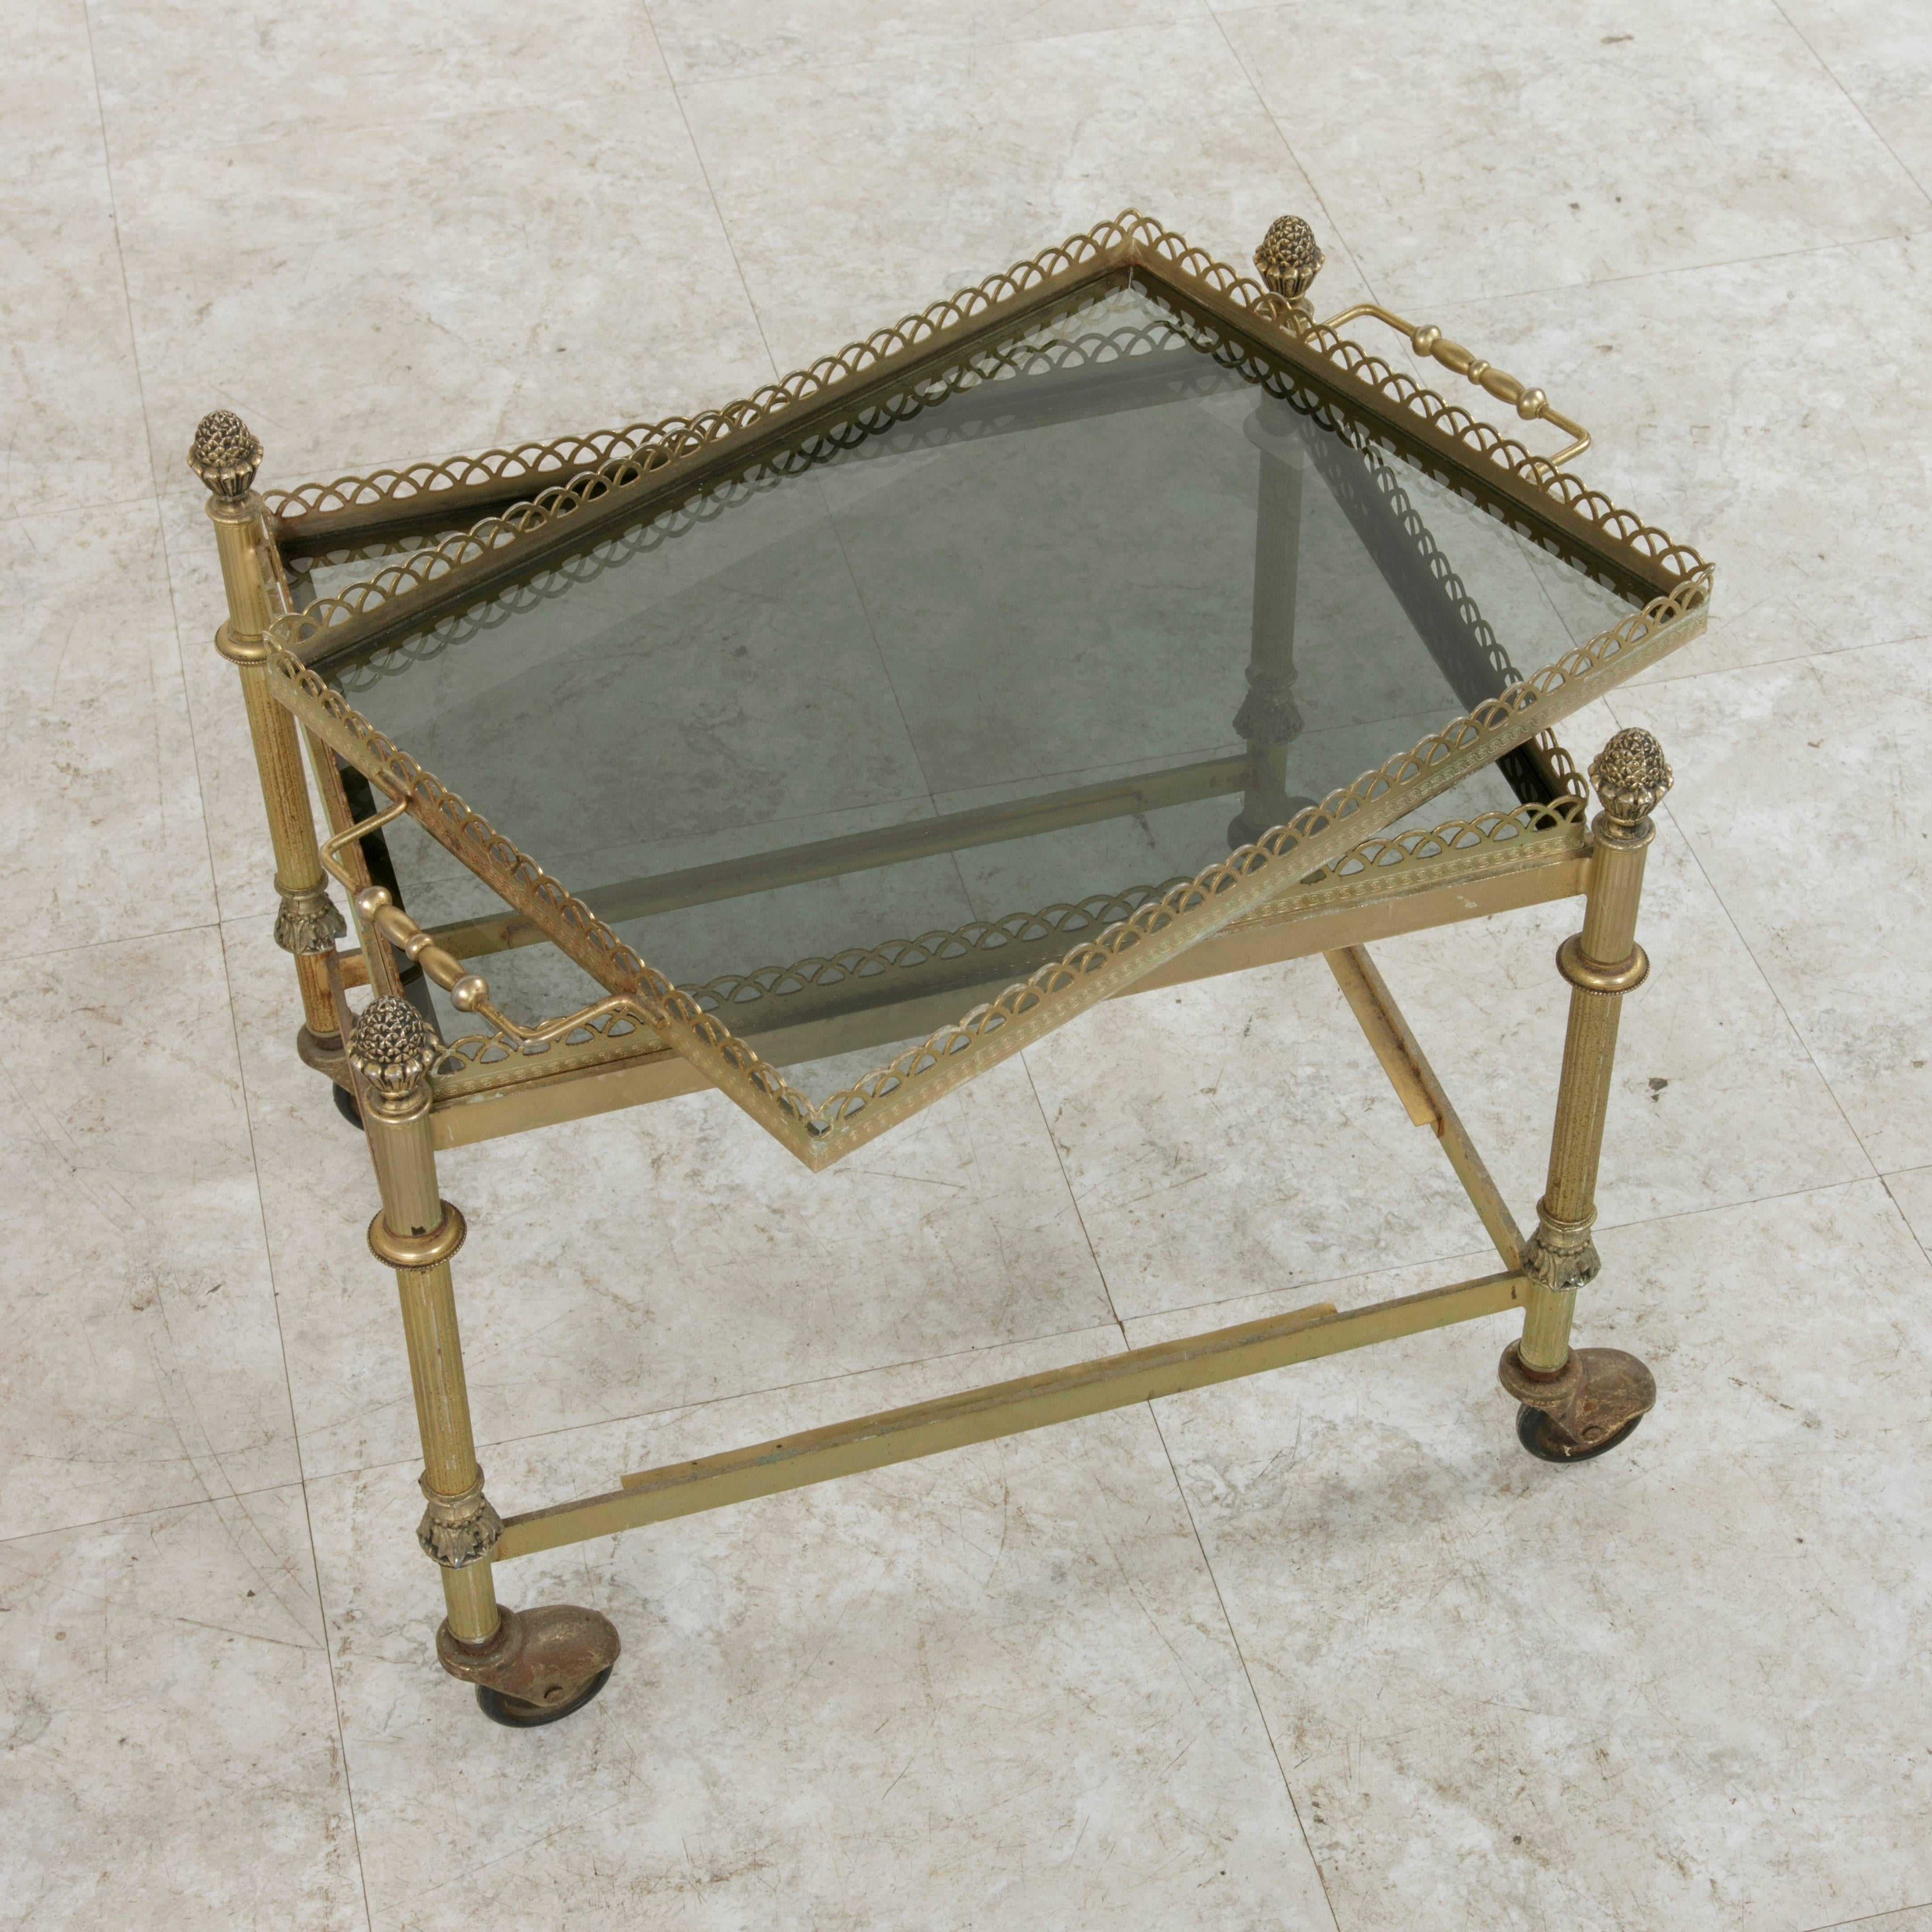 Set of Three Mid-20th Century French Bronze Nesting Tables with Glass Trays For Sale 4